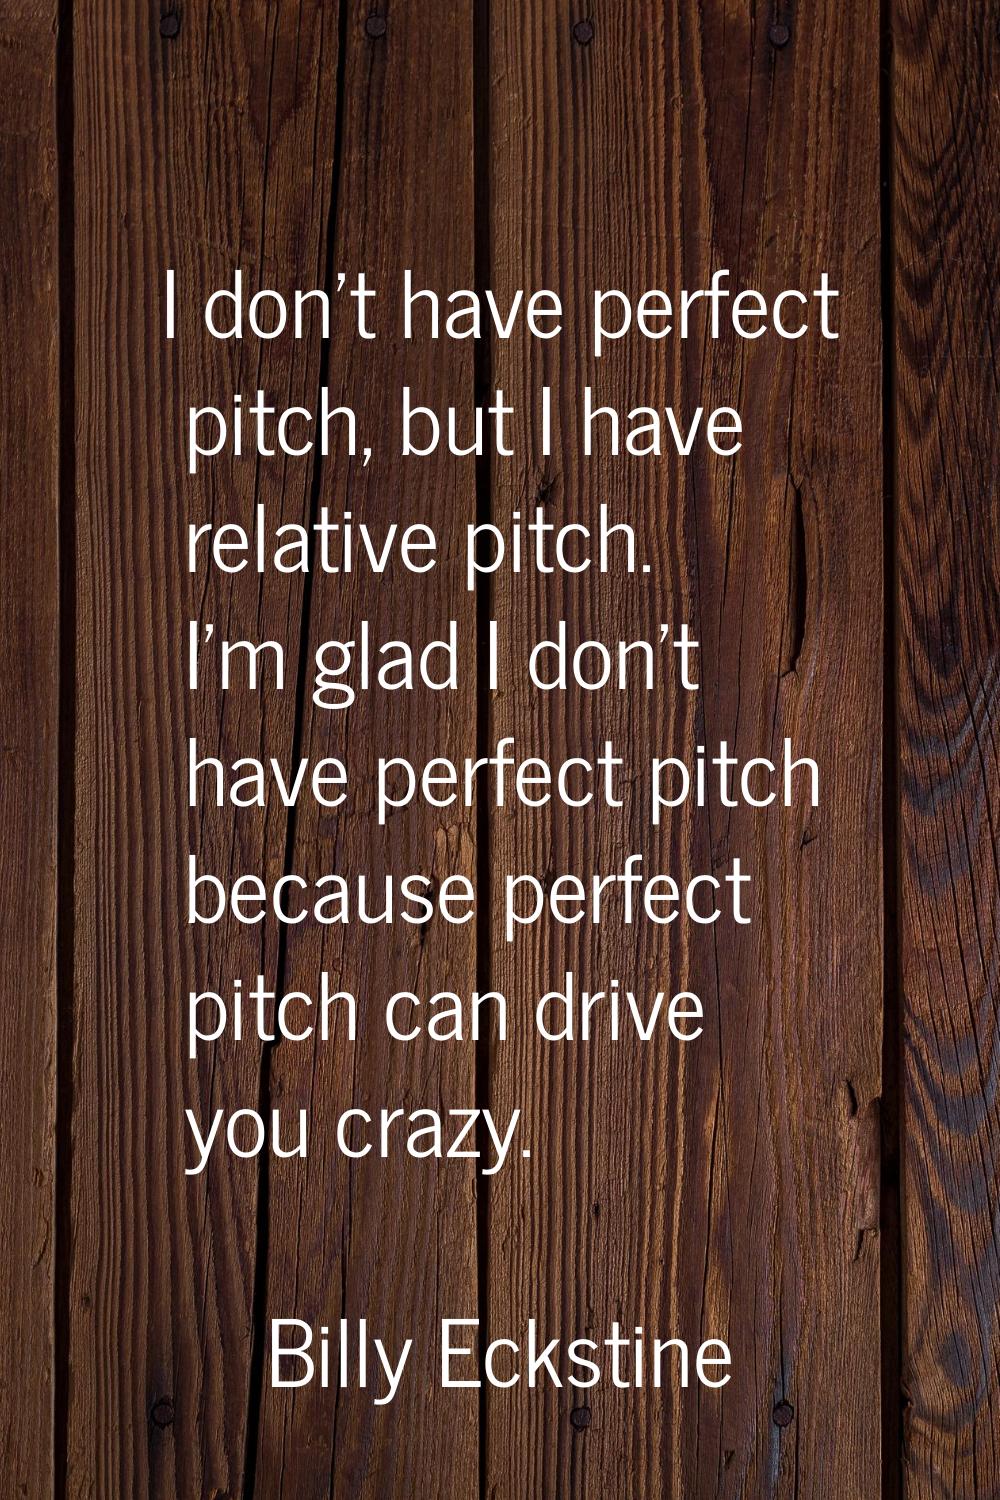 I don't have perfect pitch, but I have relative pitch. I'm glad I don't have perfect pitch because 